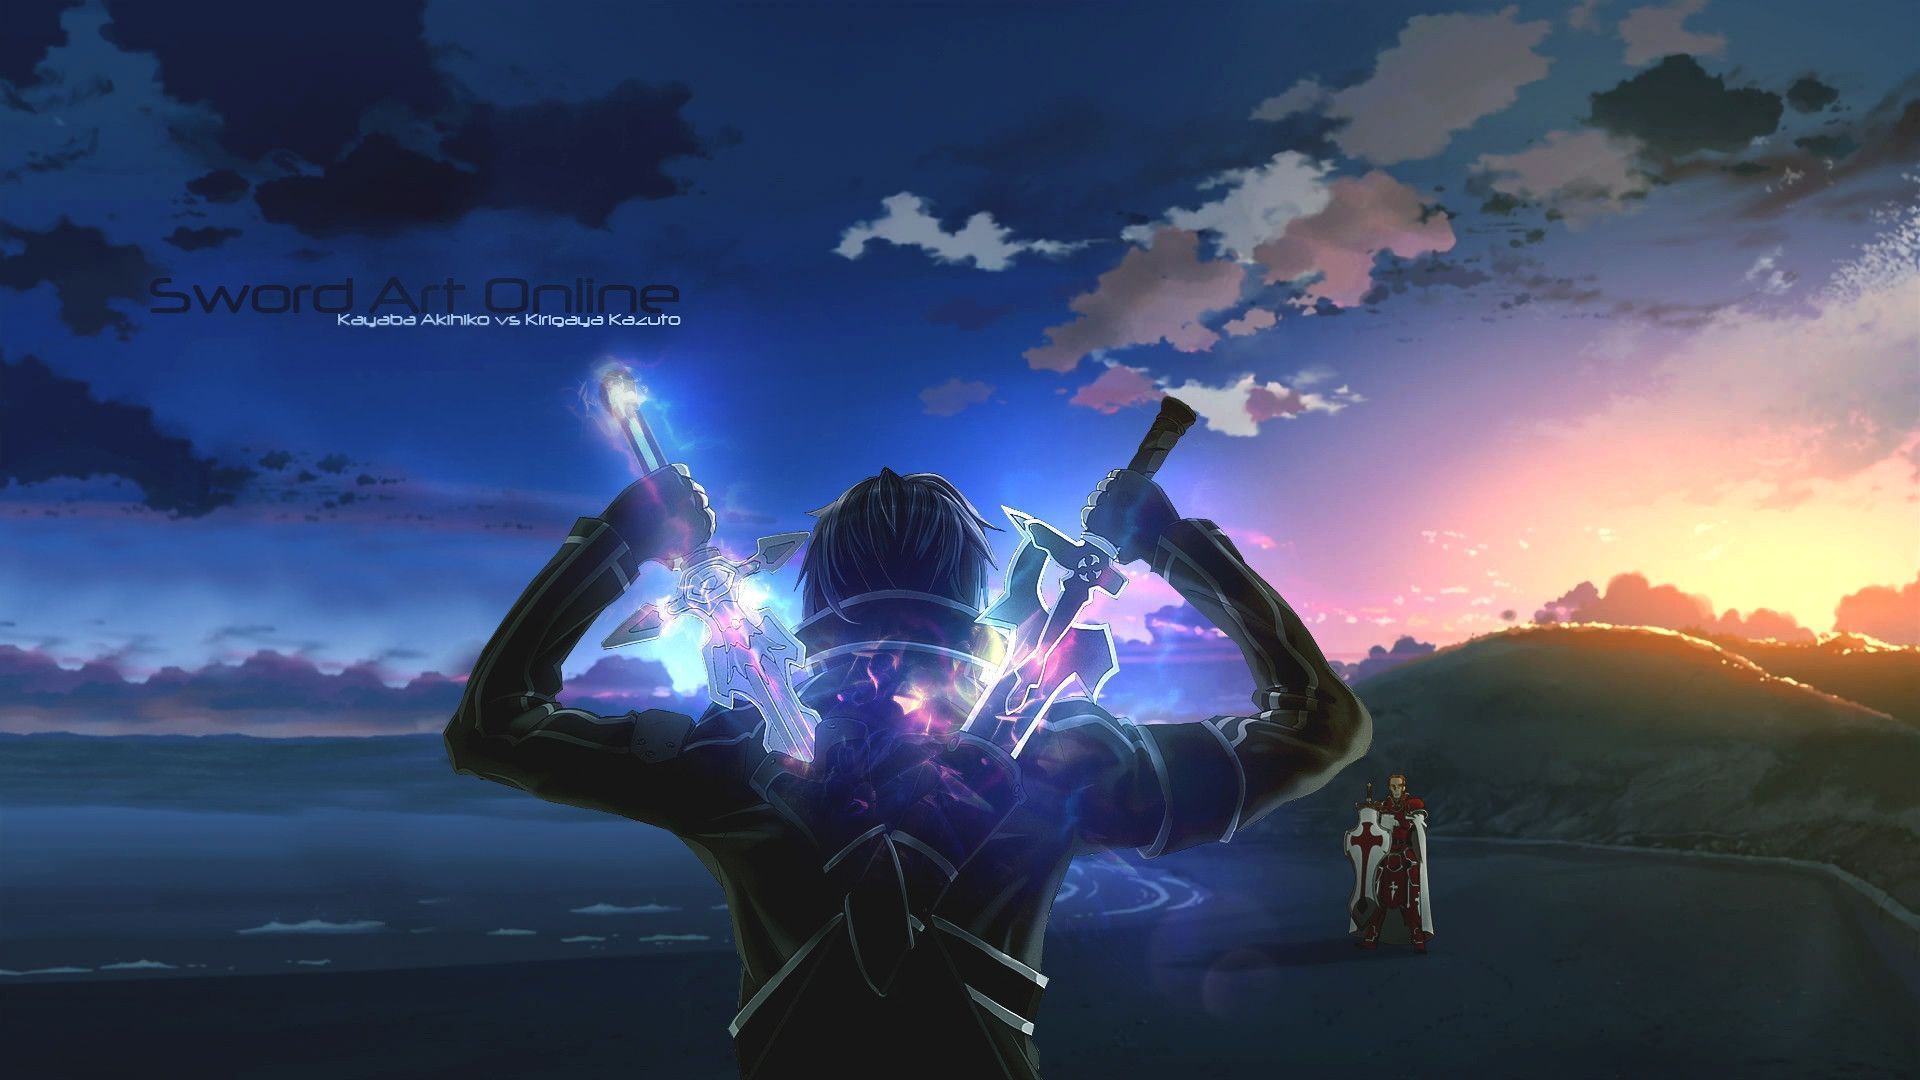 Epic Anime Backgrounds